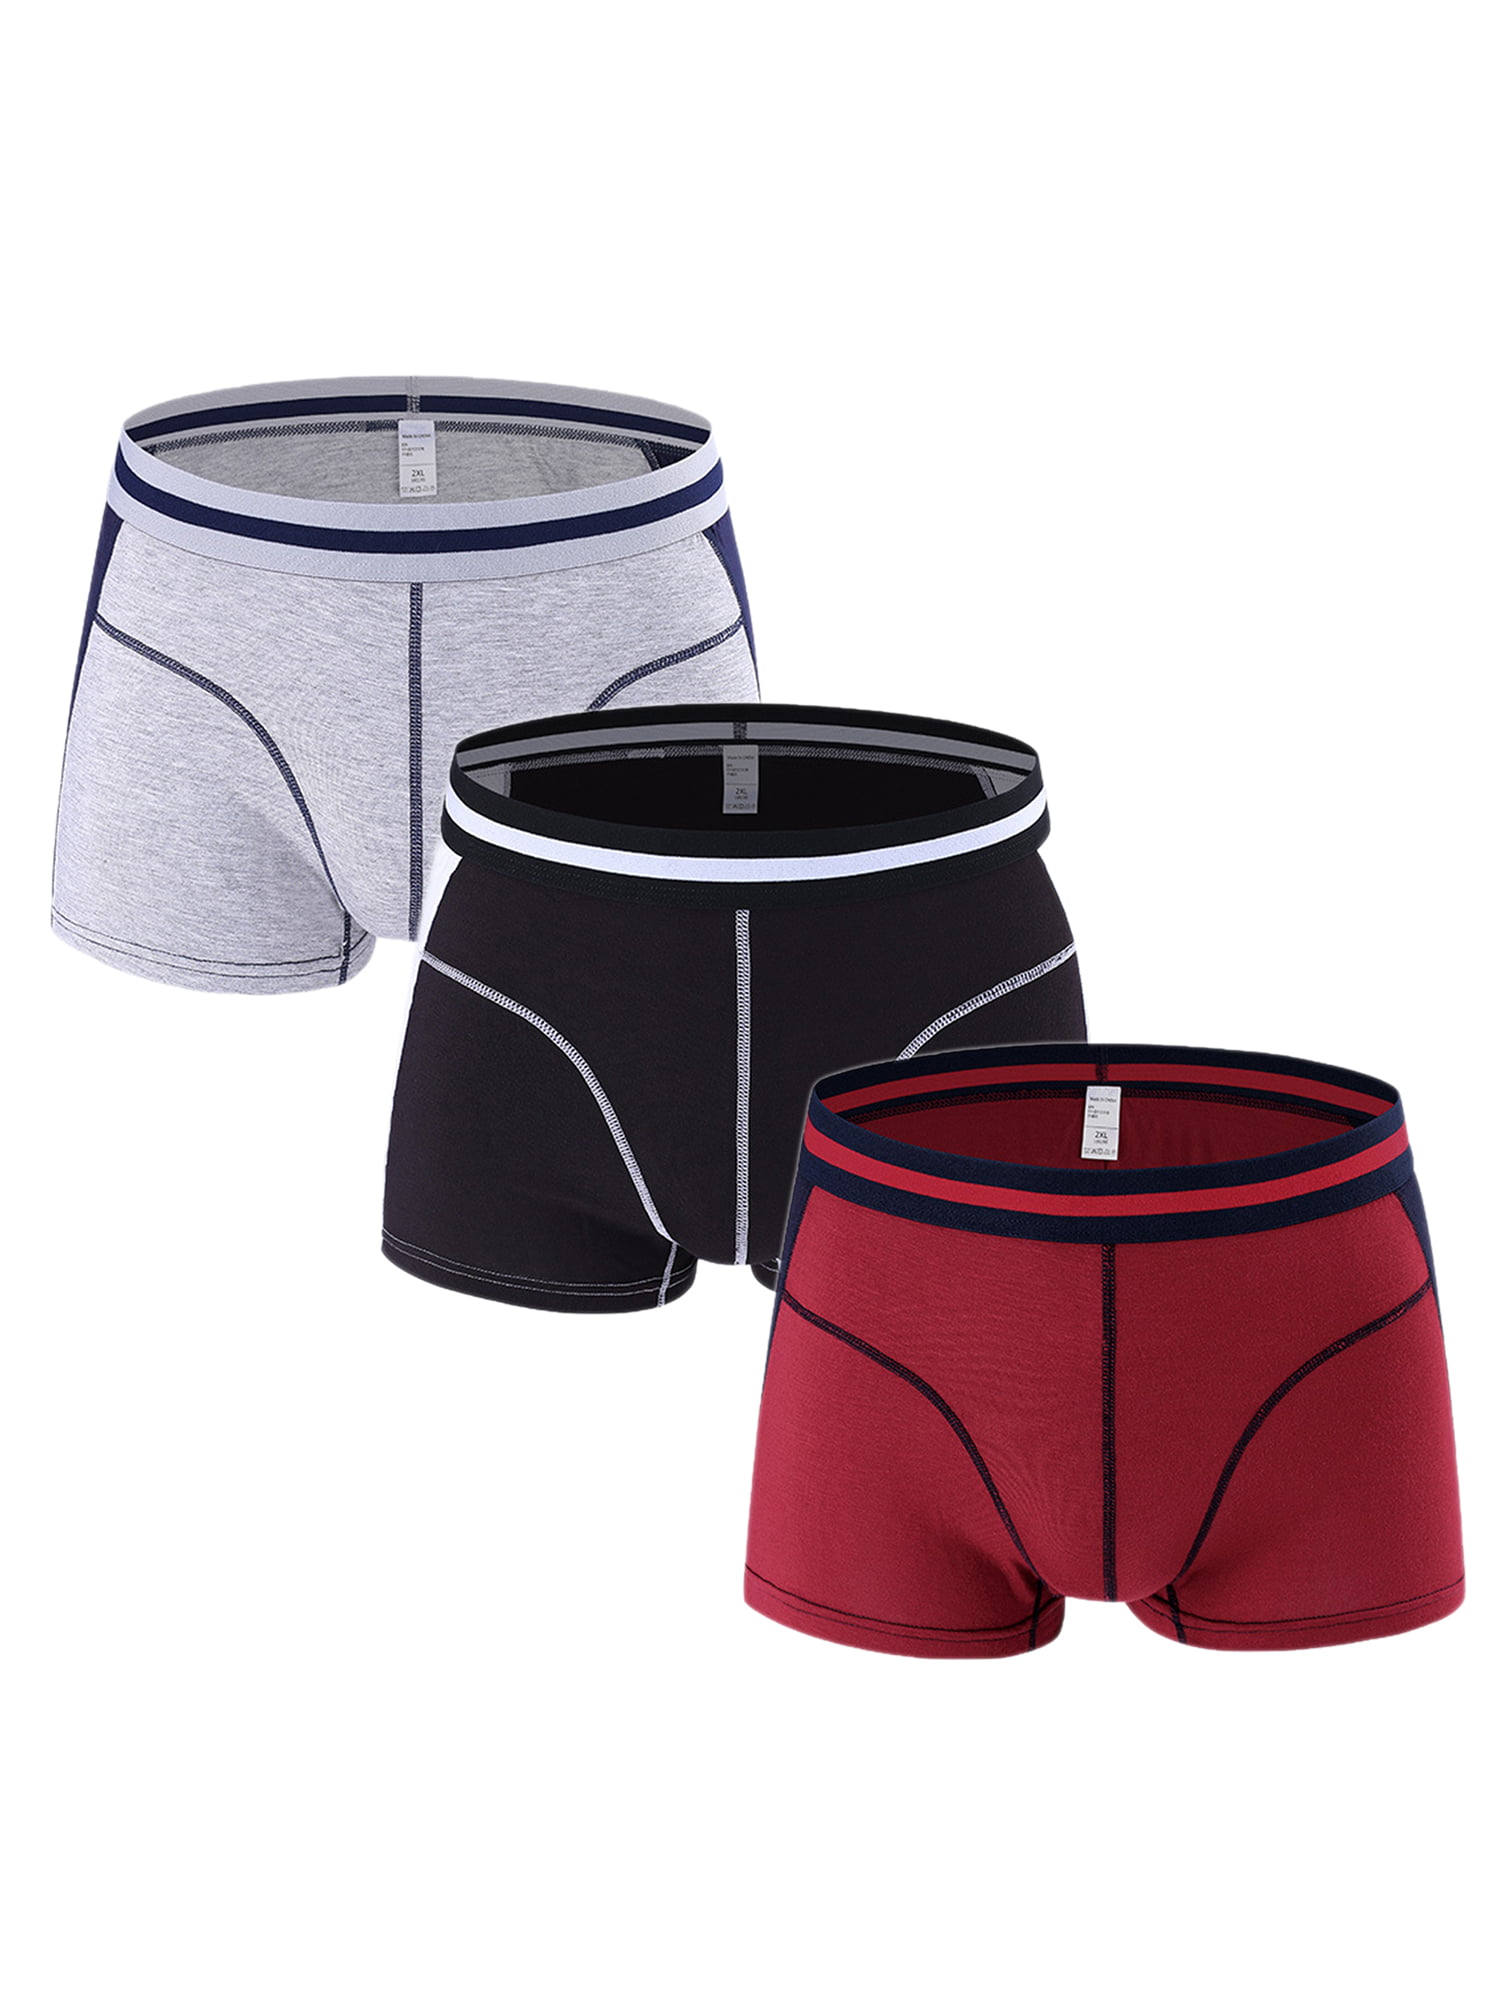 Mens Woven Checked Boxers 3 Multi-Pack Cotton Breathable Loose Fit Underwear 